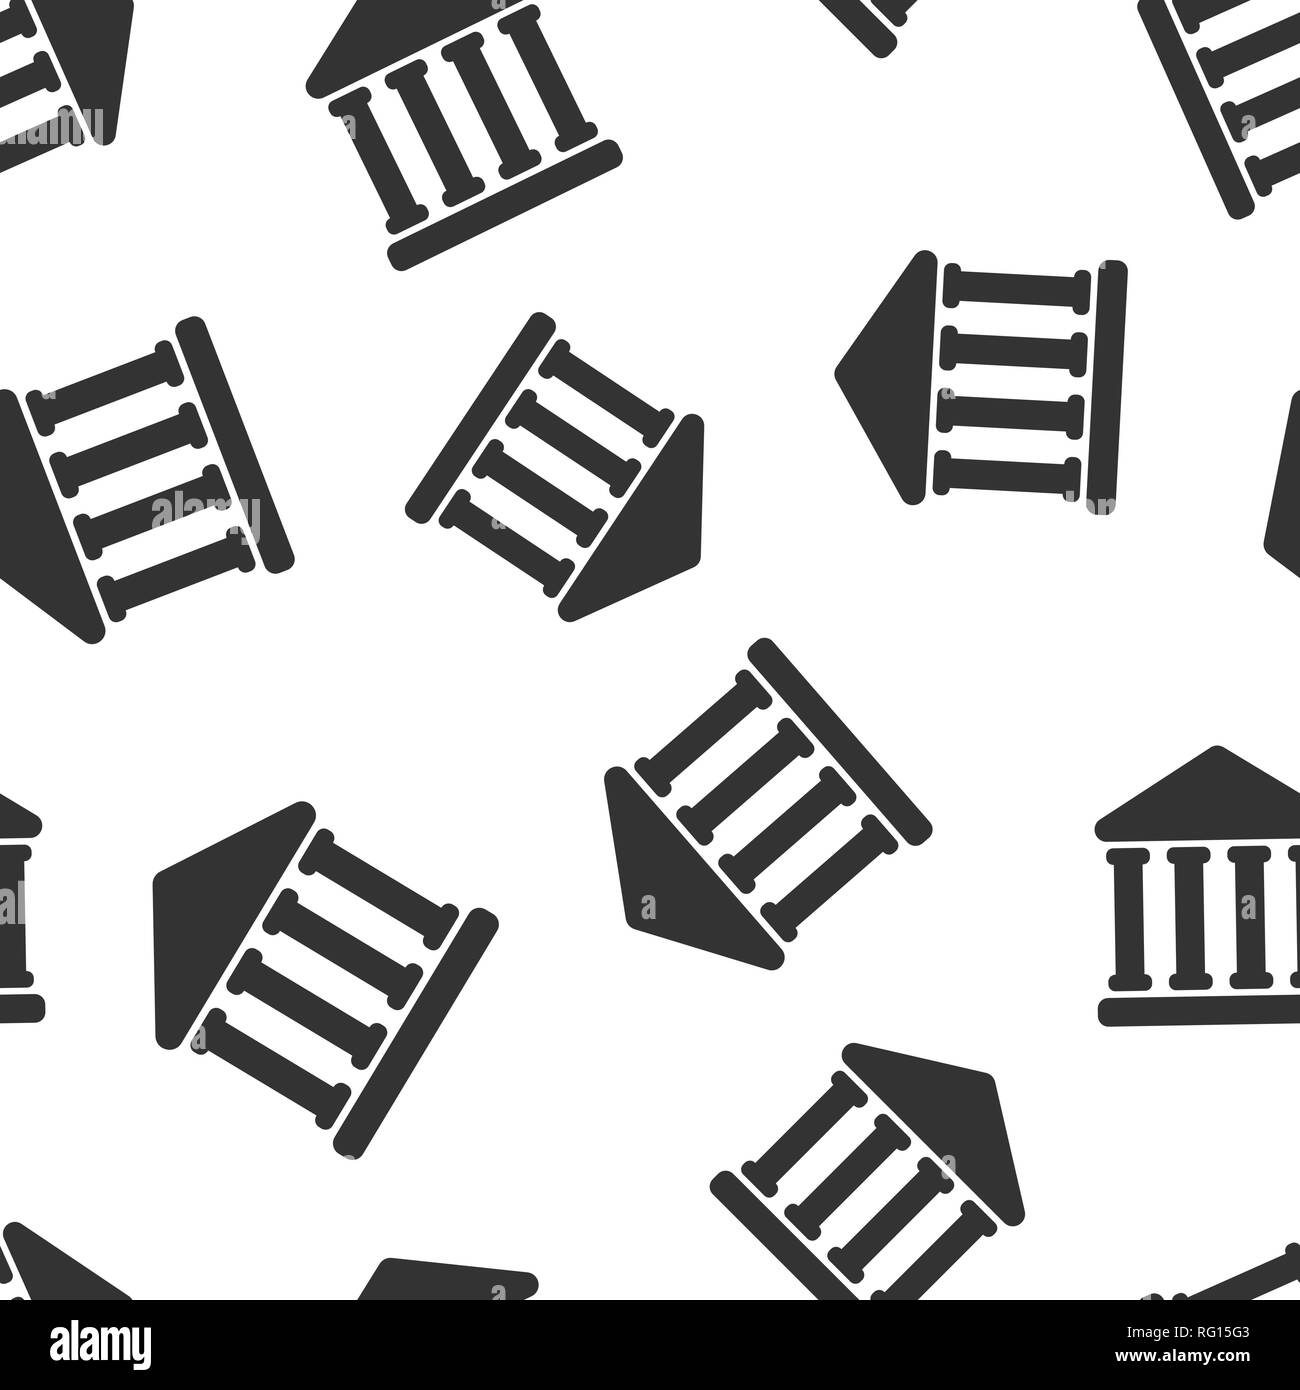 Bank building icon seamless pattern background. Government architecture vector illustration. Museum exterior symbol pattern. Stock Vector